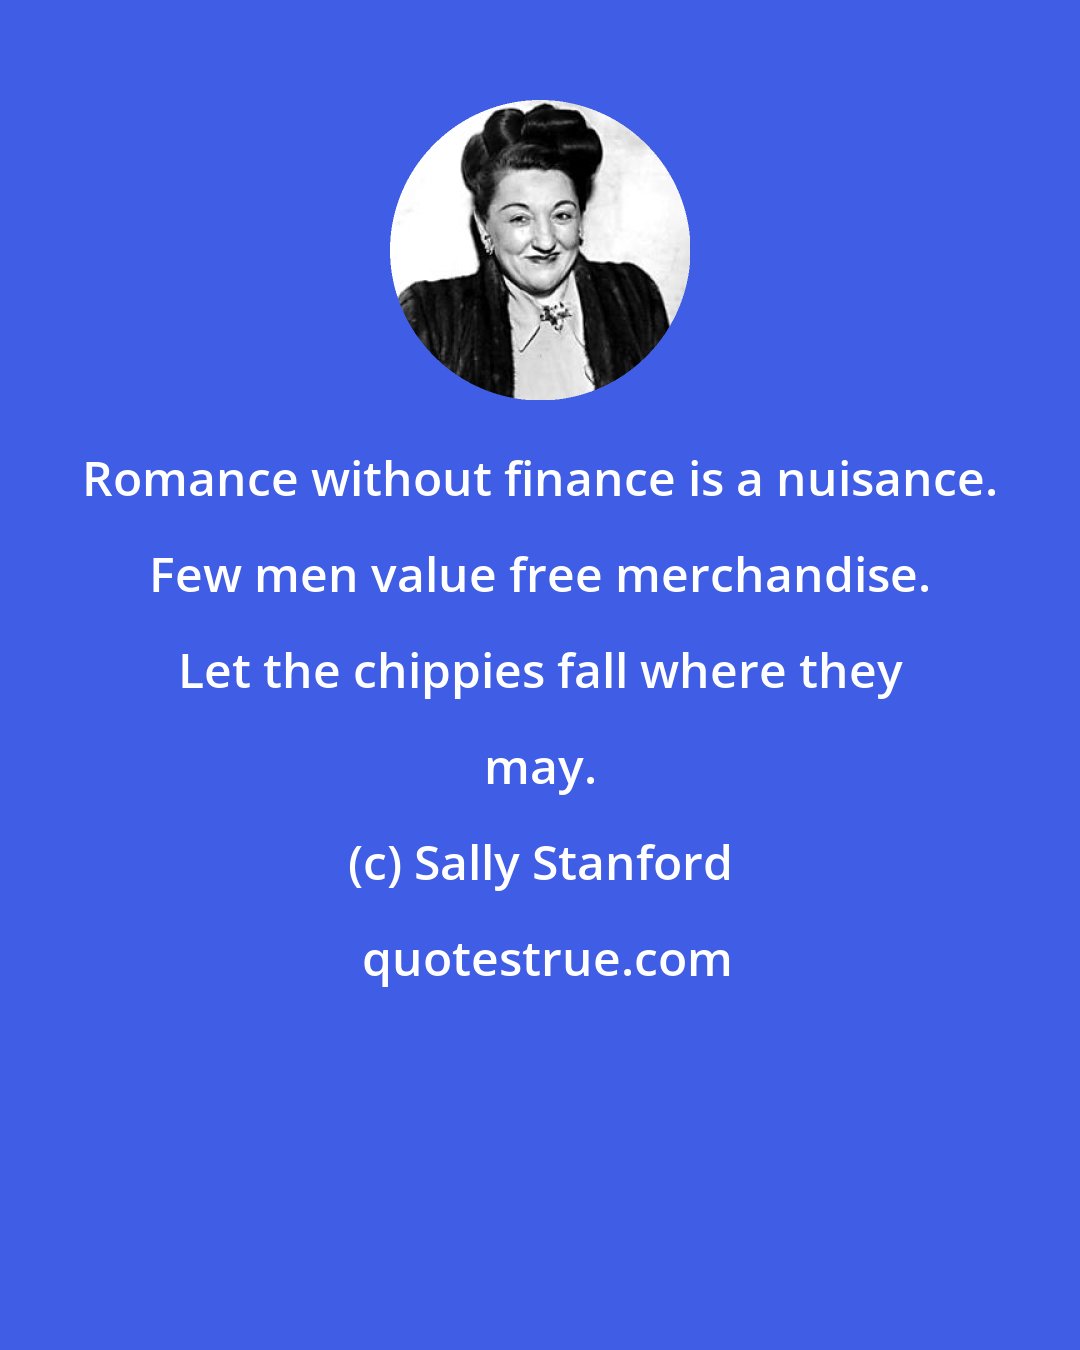 Sally Stanford: Romance without finance is a nuisance. Few men value free merchandise. Let the chippies fall where they may.